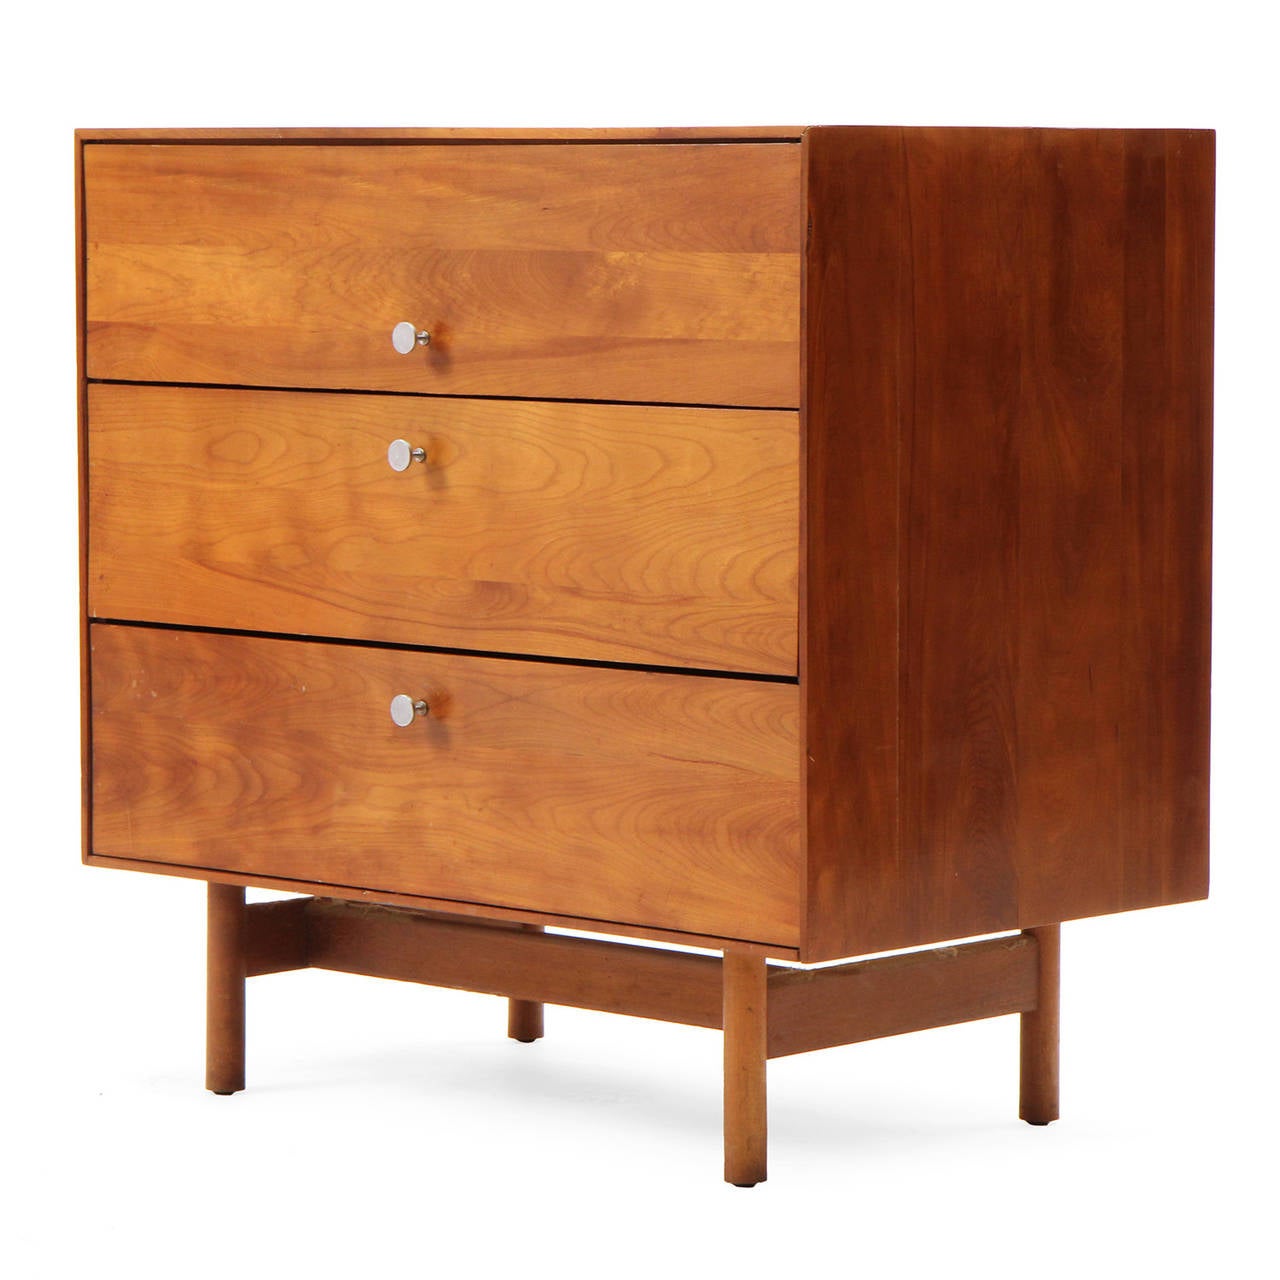 A spare and refined chest of drawers having a thin-edged honey-toned birch rectilinear case with brushed steel drawer pulls floating on an architectural dowel leg base.